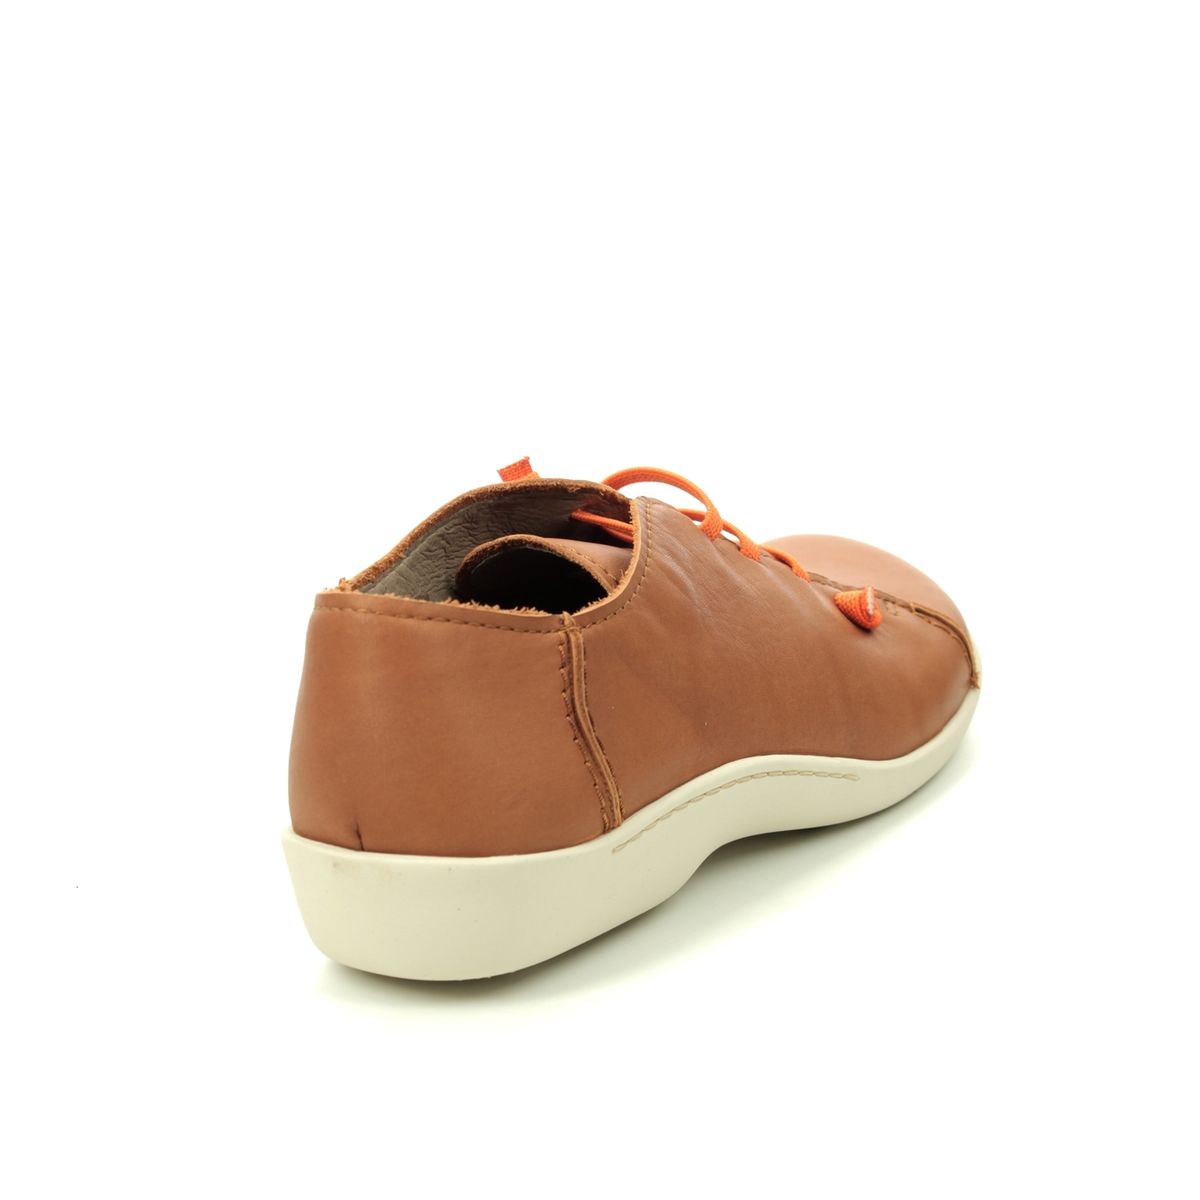 Begg Exclusive Cindy SH0495-27 Tan Leather lacing shoes